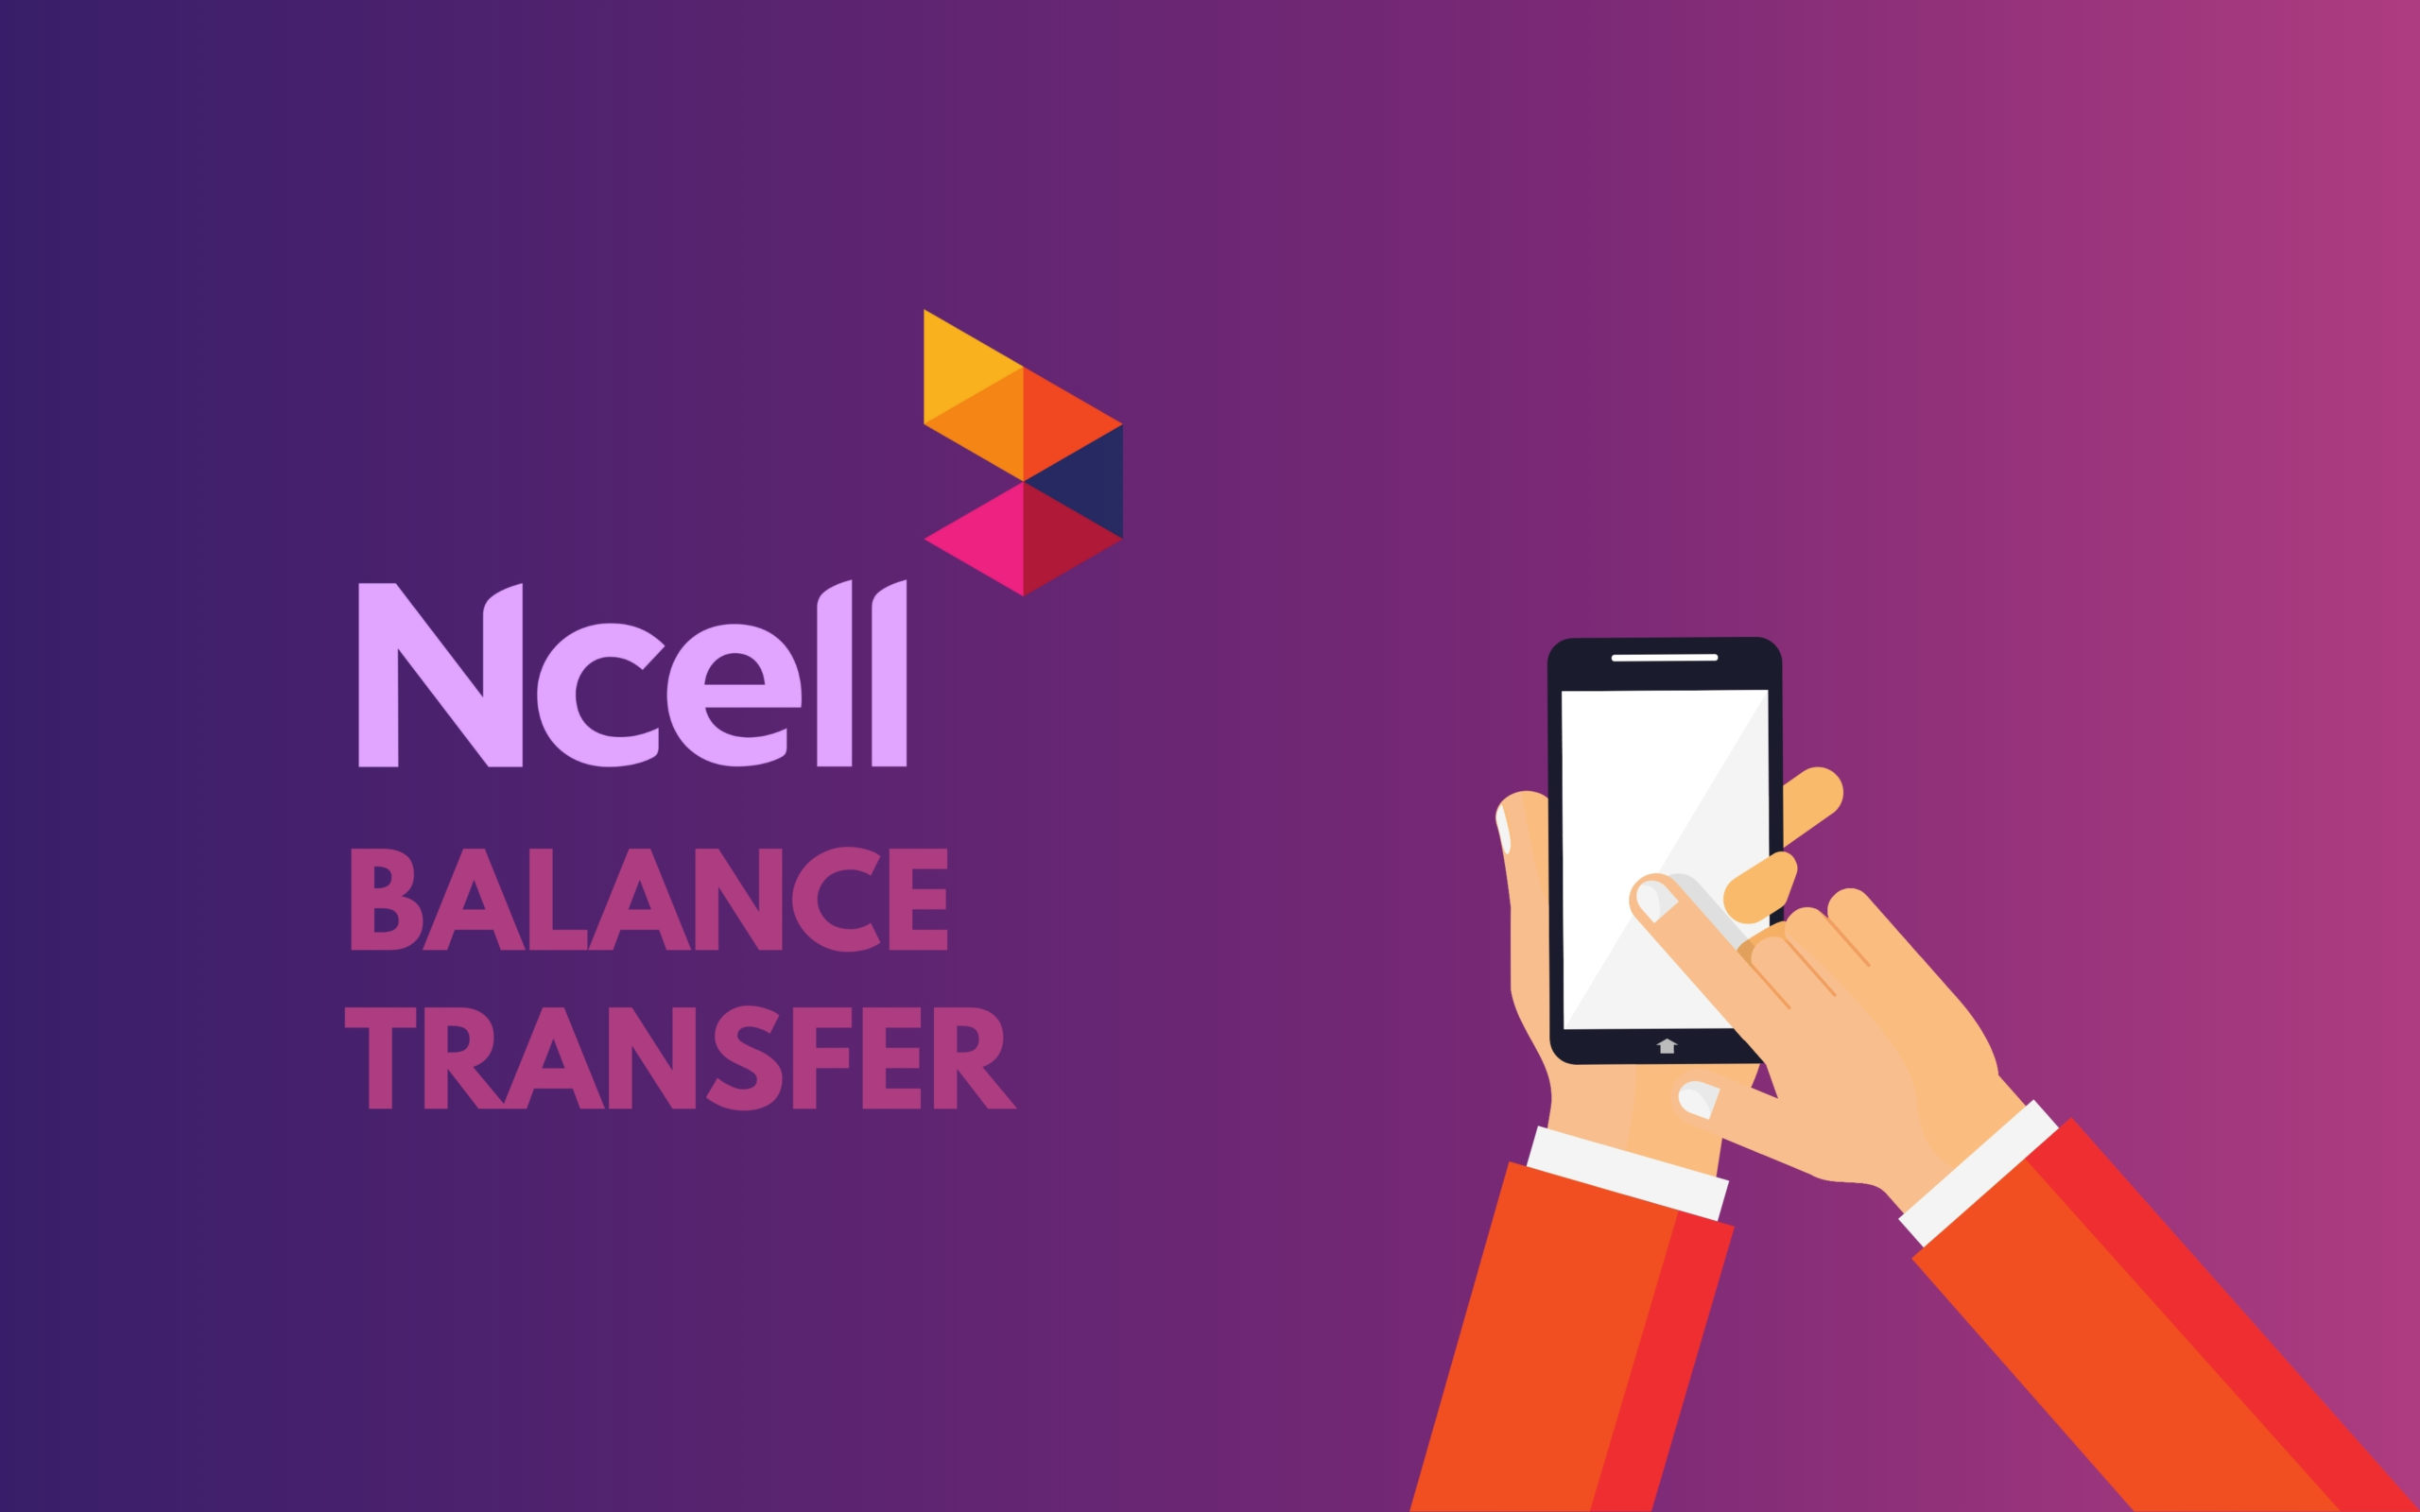 How to transfer balance in Ncell to Ncell